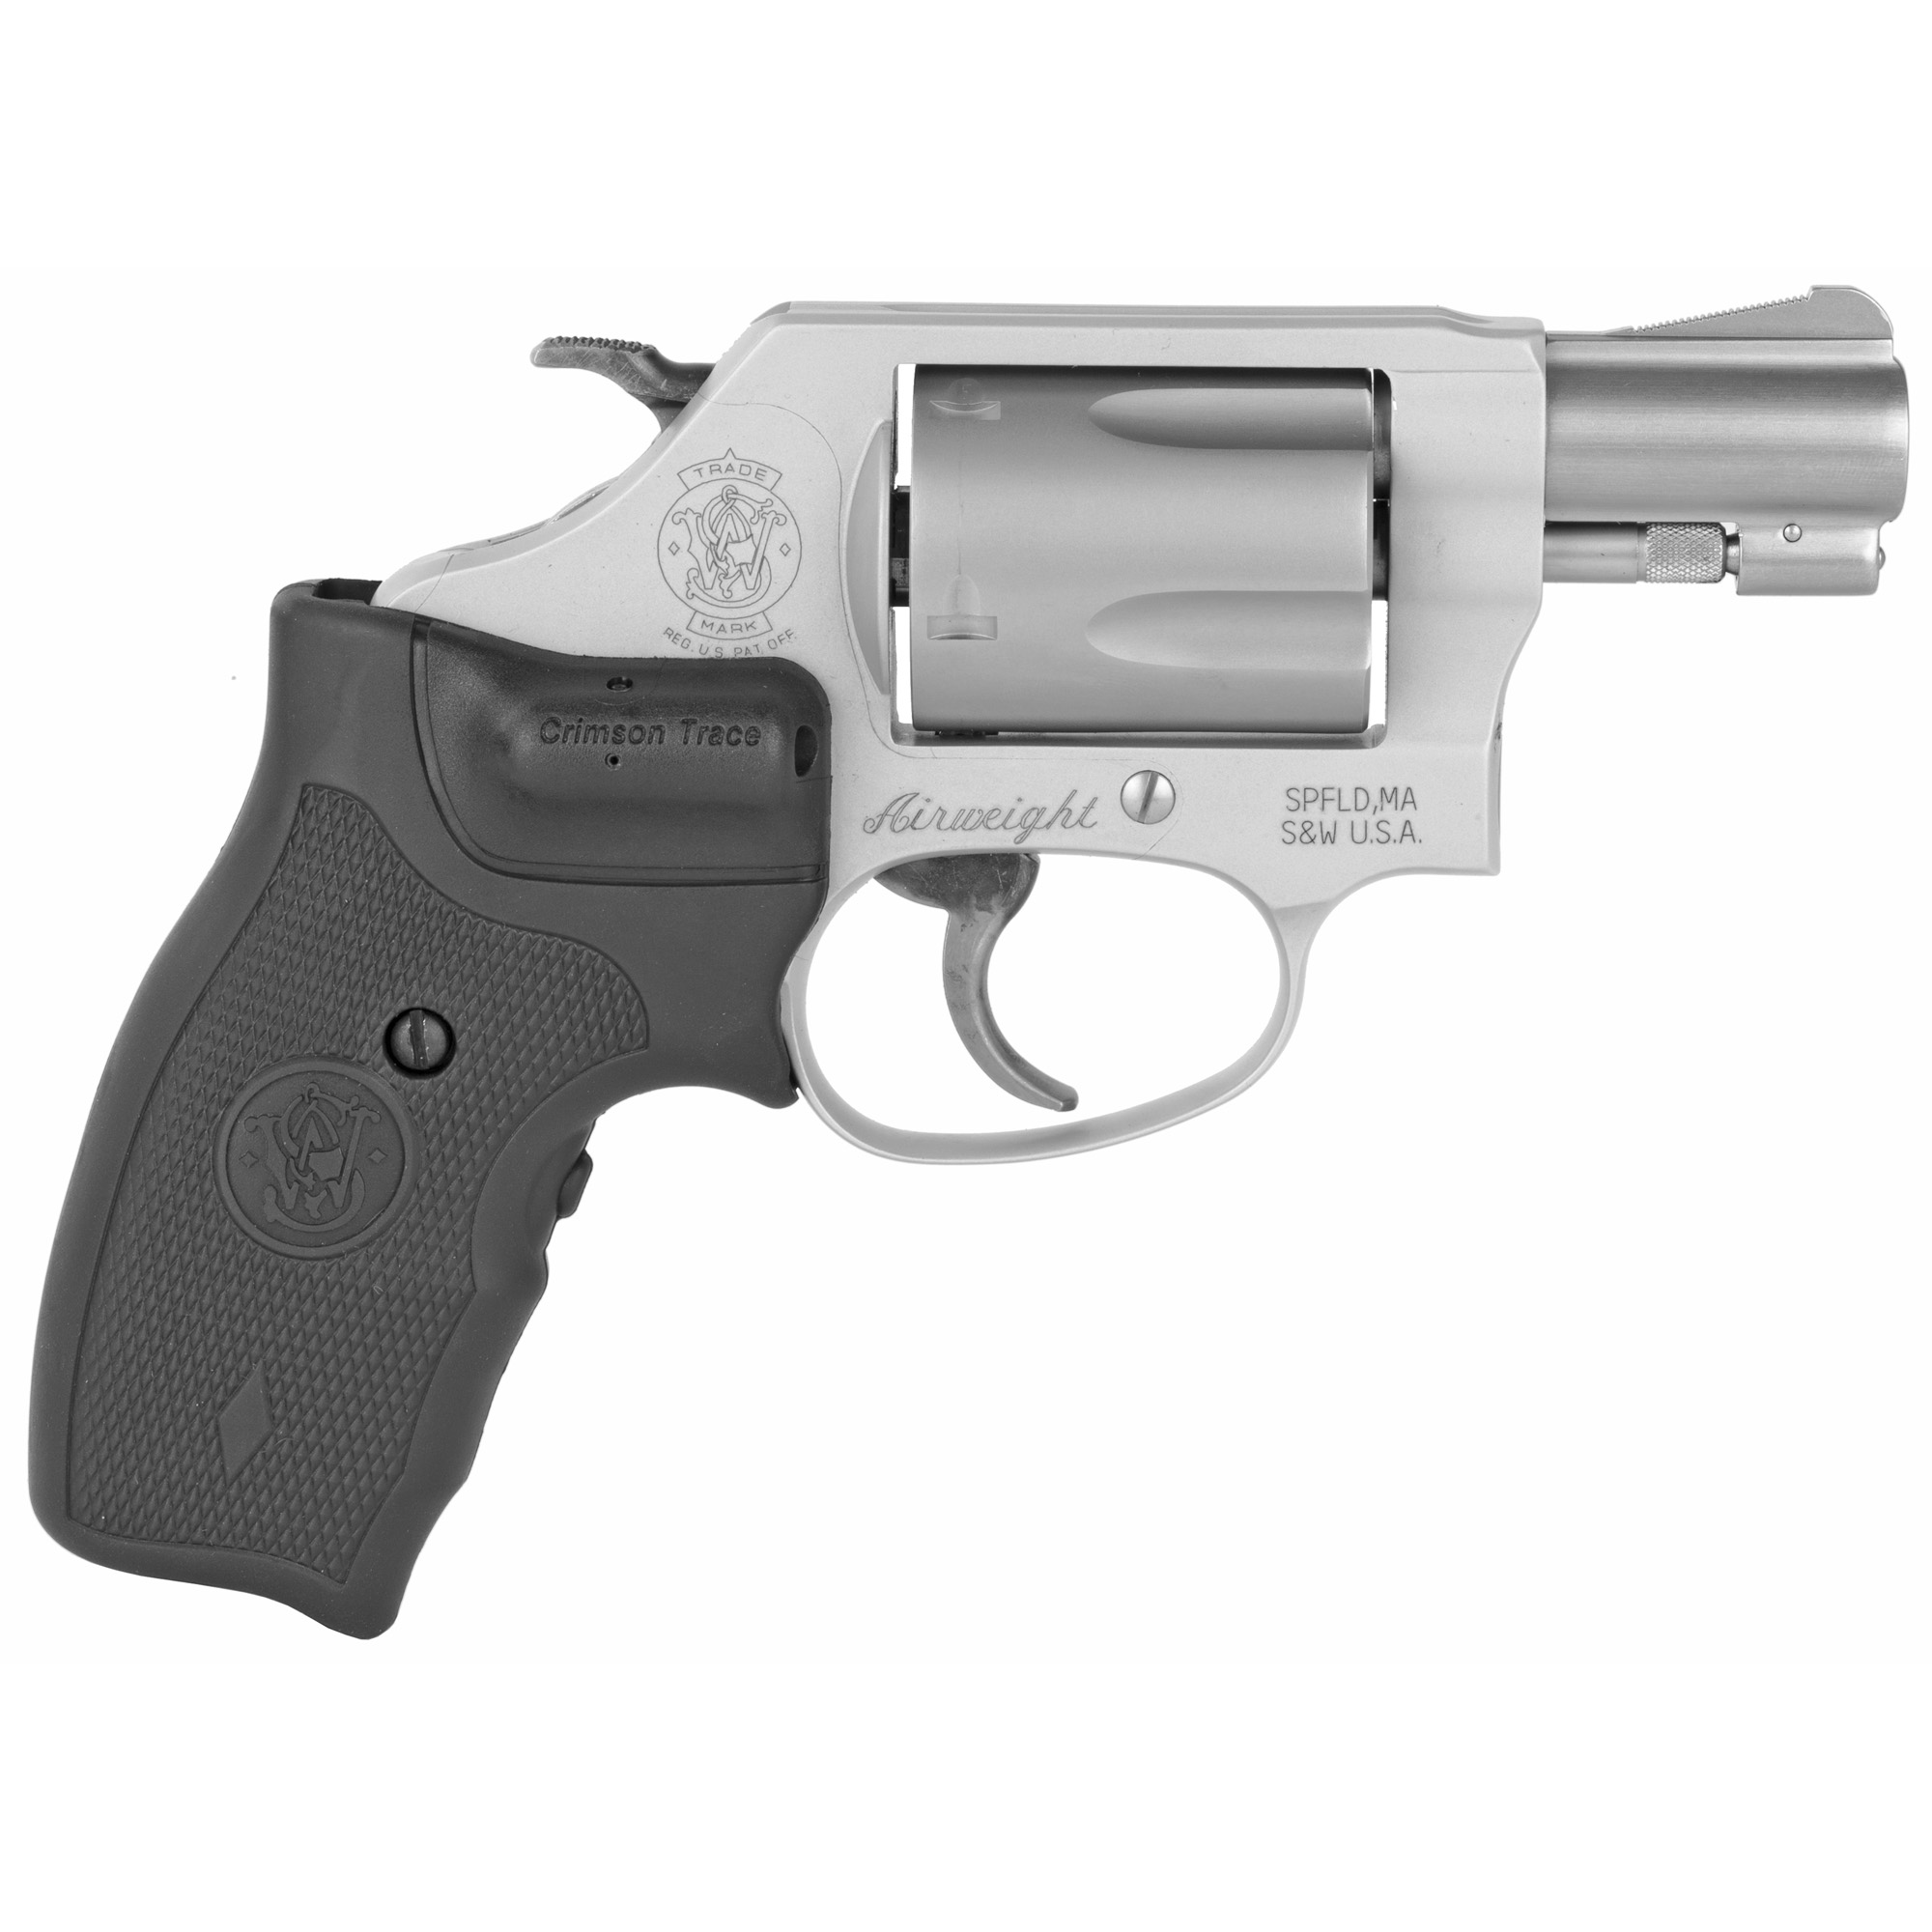 Smith & Wesson, Model 637, Double Action, Metal Frame Revolver, J-Frame, 38 Special, 1.875" Barrel, Alloy, Matte Finish, Silver, Rubber Crimson Trace Laser Grips, Fixed Sights, 5 Rounds